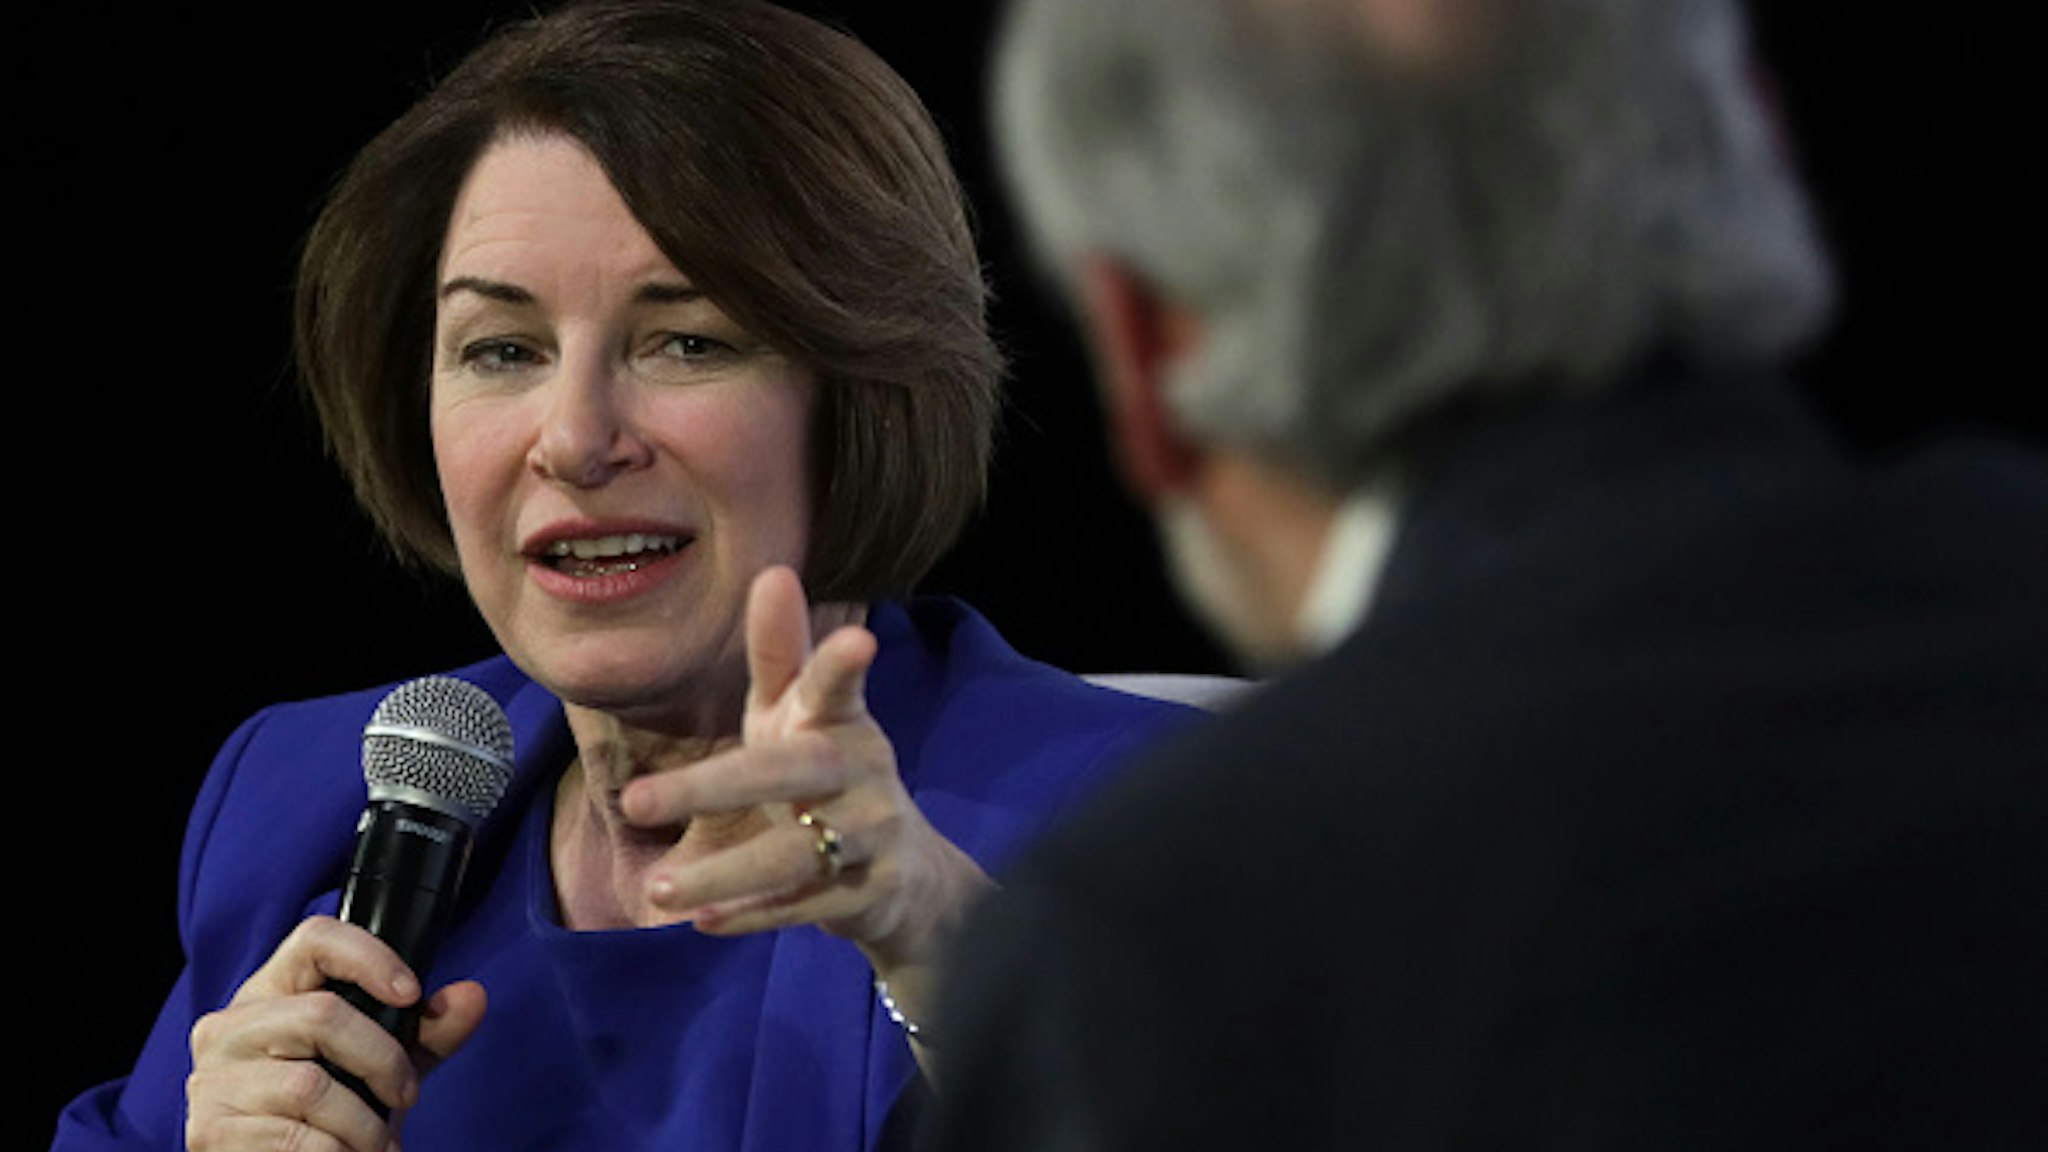 LAS VEGAS, NEVADA - FEBRUARY 16: Democratic presidential candidate Sen. Amy Klobuchar (D-MN) participates in a “Moving America Forward: A Presidential Candidate Forum on Infrastructure, Jobs, and Building a Better America” at University of Nevada February 16, 2020 in Las Vegas, Nevada. United For Infrastructure held the forum for 2020 presidential candidates to discuss “their plans and priorities for the future of American’s infrastructure.”